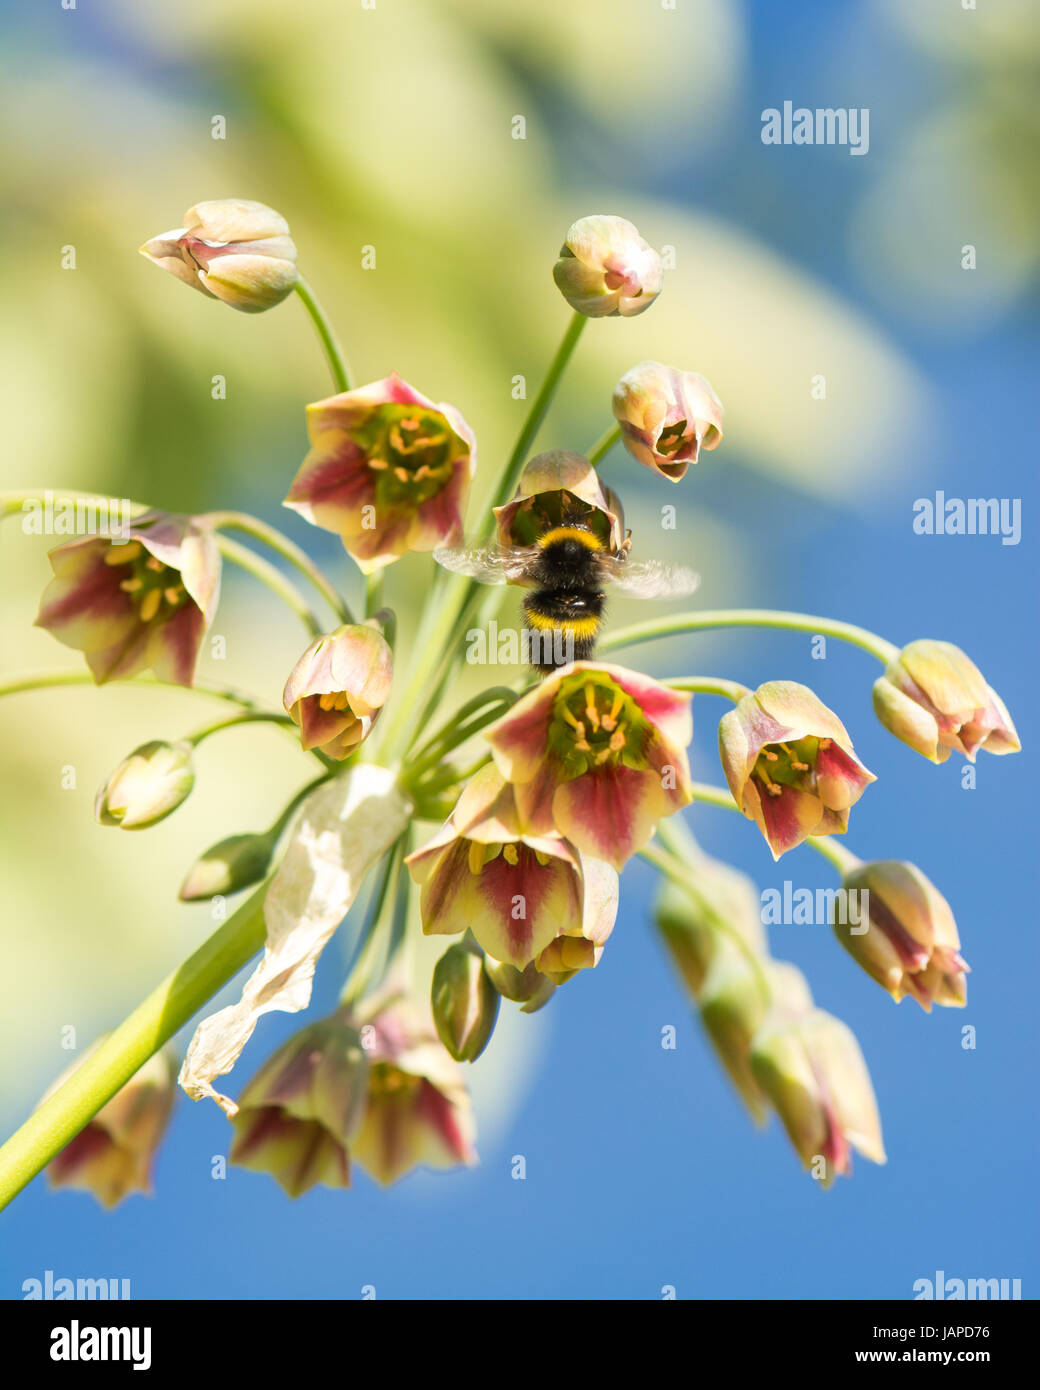 Sicillian honey garlic, Nectaroscordum siculum.                         Stirlingshire, Scotland, UK. 7th June, 2017. UK weather - blue skies in Stirlingshire as bumblebees drink nectar from Honey Garlic flowers ahead of the rain forecast tomorrow Credit: Kay Roxby/Alamy Live News Stock Photo